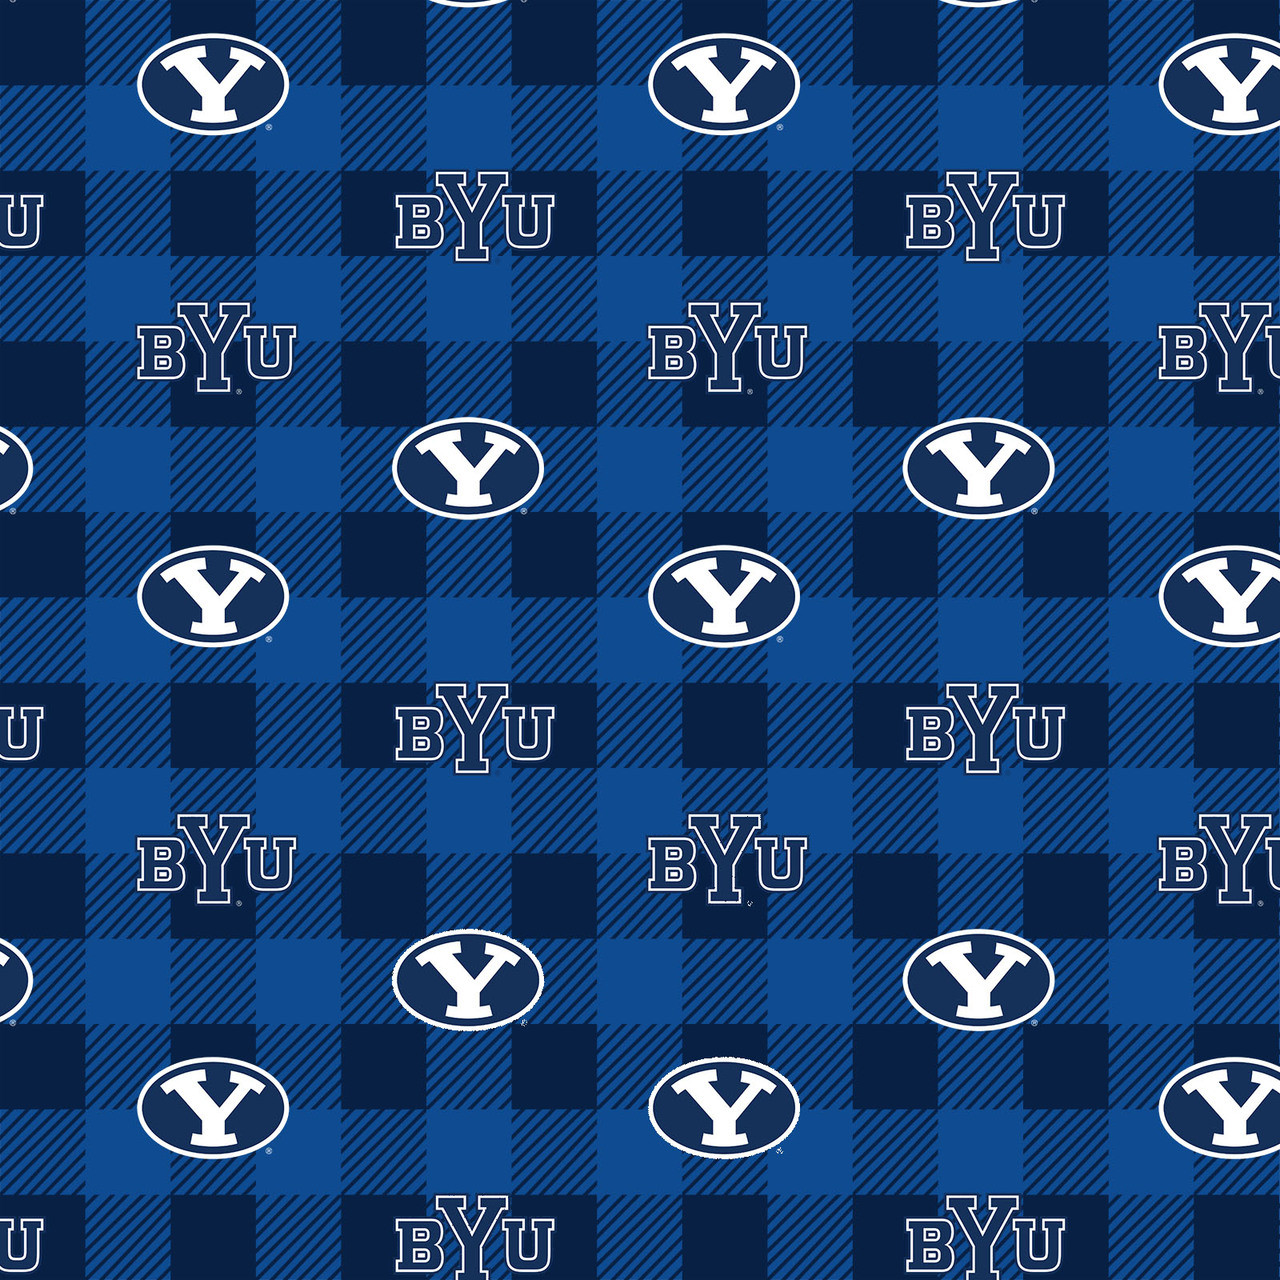 Brigham Young-BYU Fleece Fabric with Buffalo Plaid design-Sold by the Yard